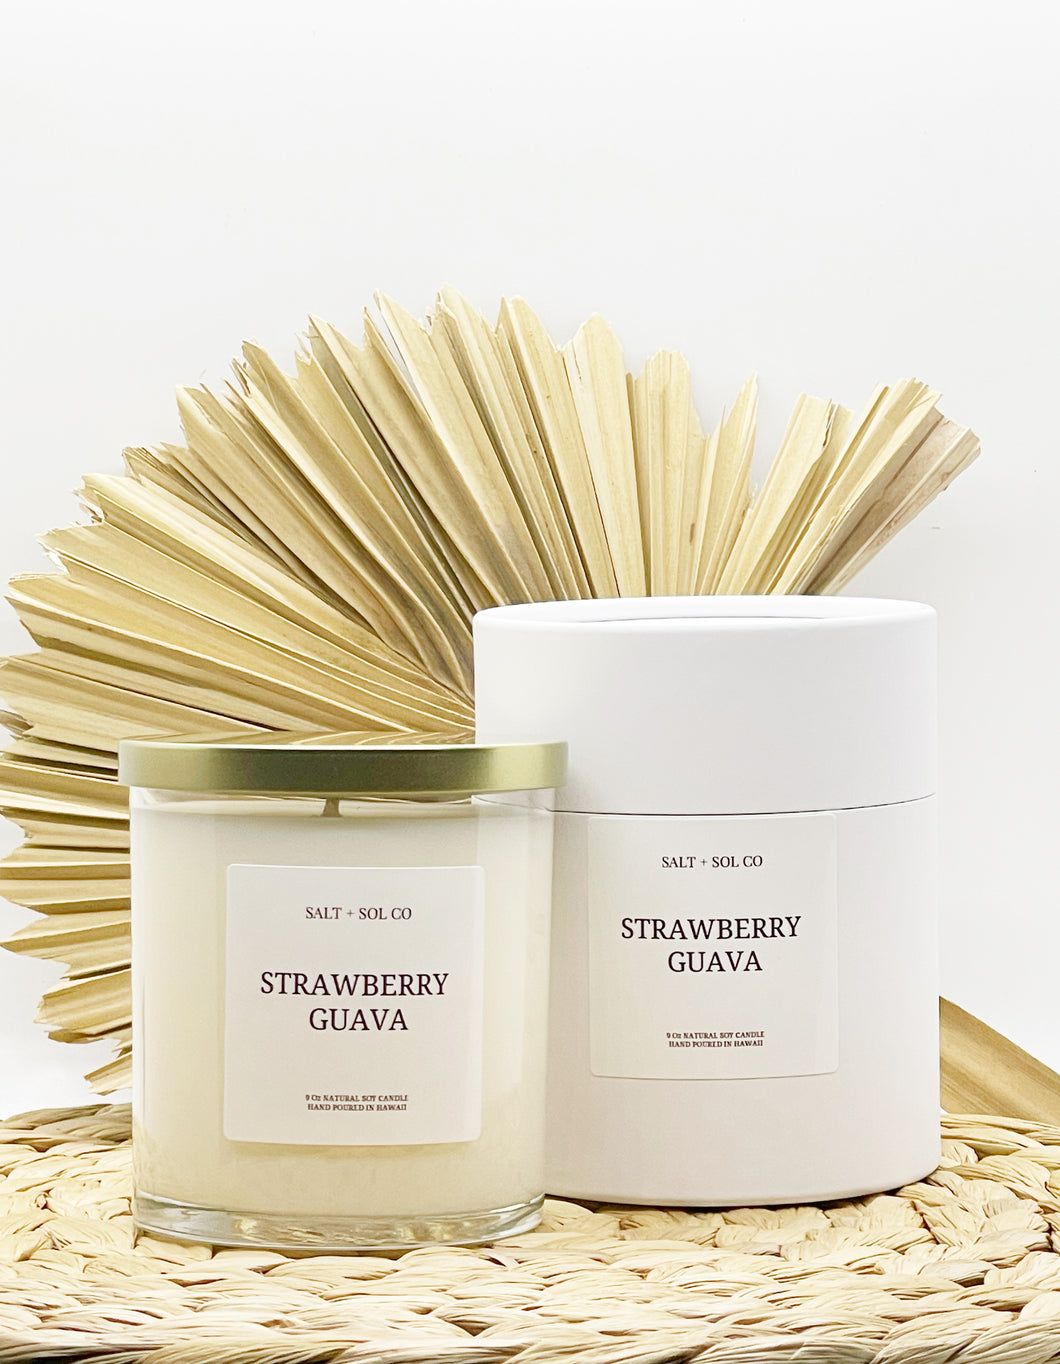 Strawberry guava luxury soy wax candle for sale at salt + SOL co